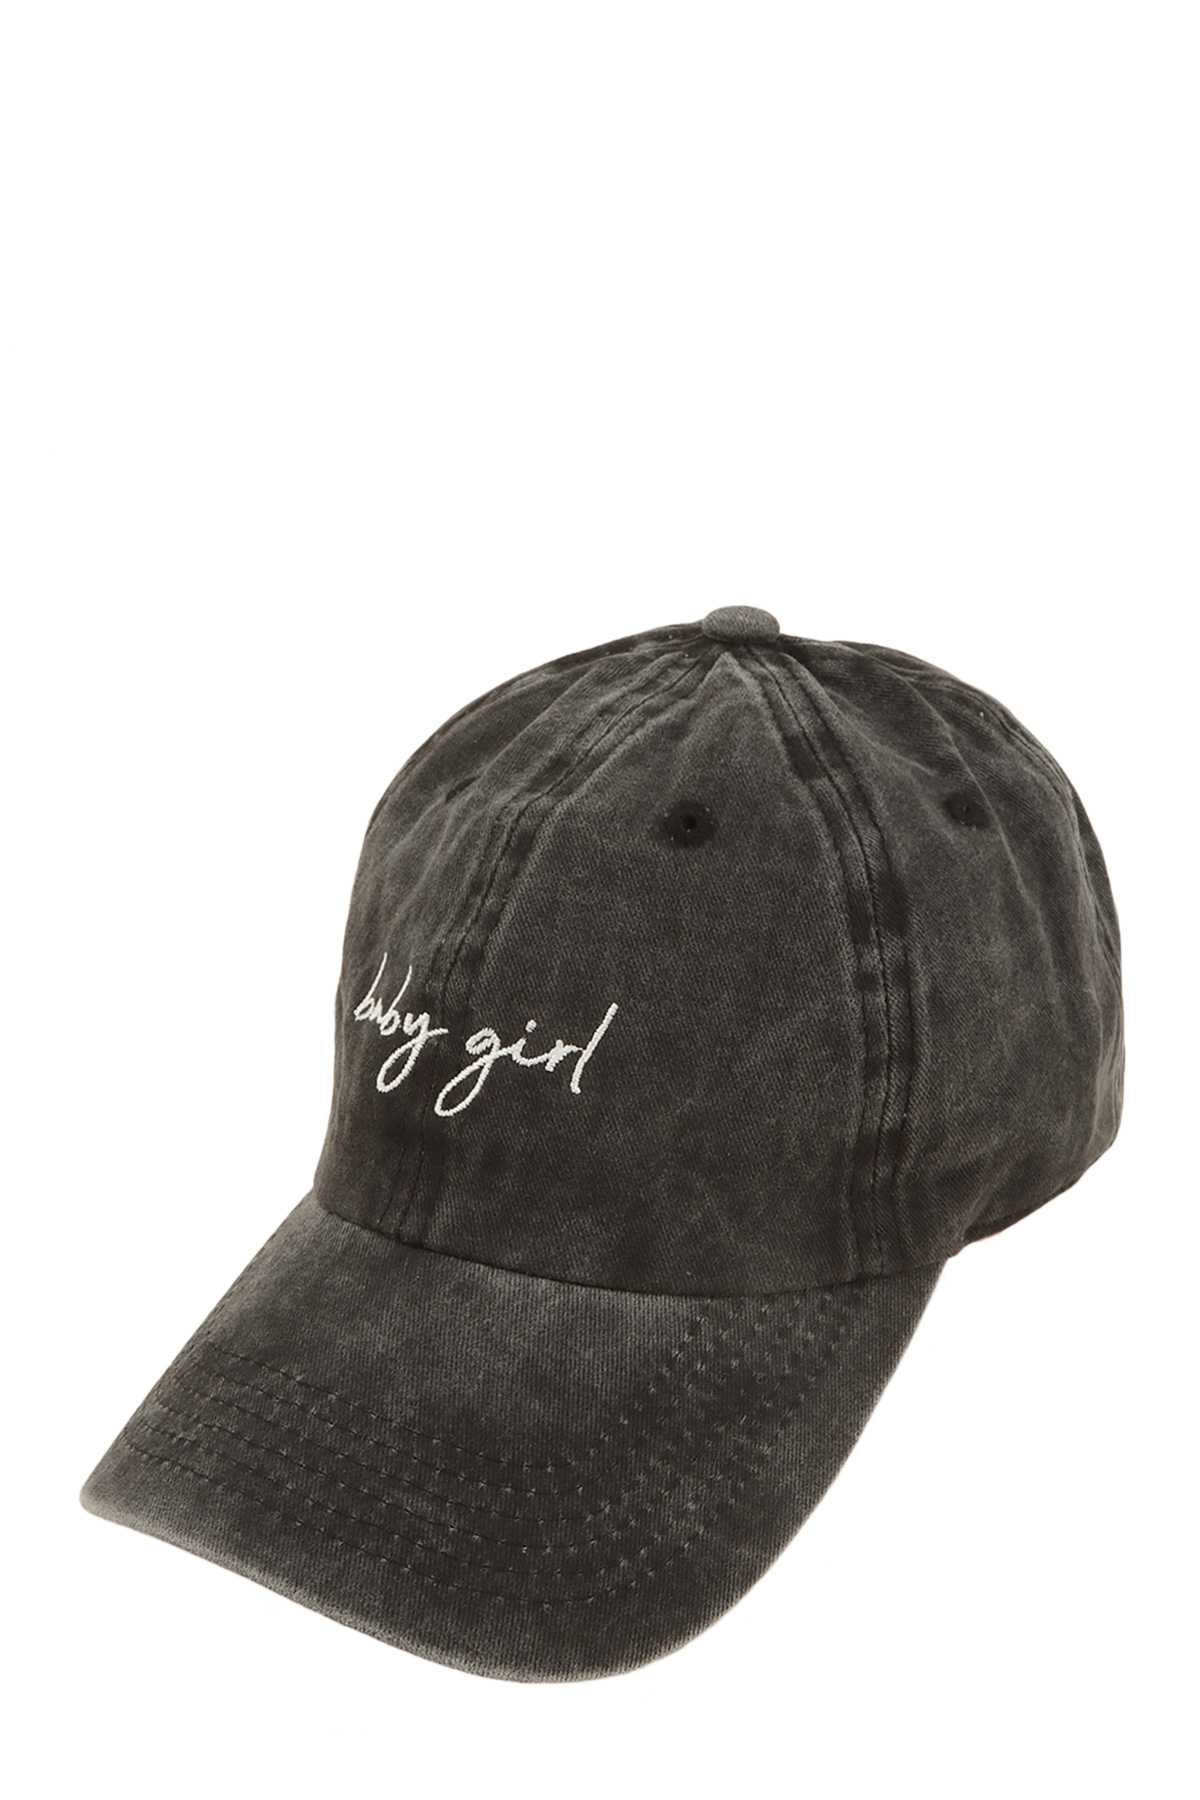 'Baby Girl' Embroidery Pigment Cap